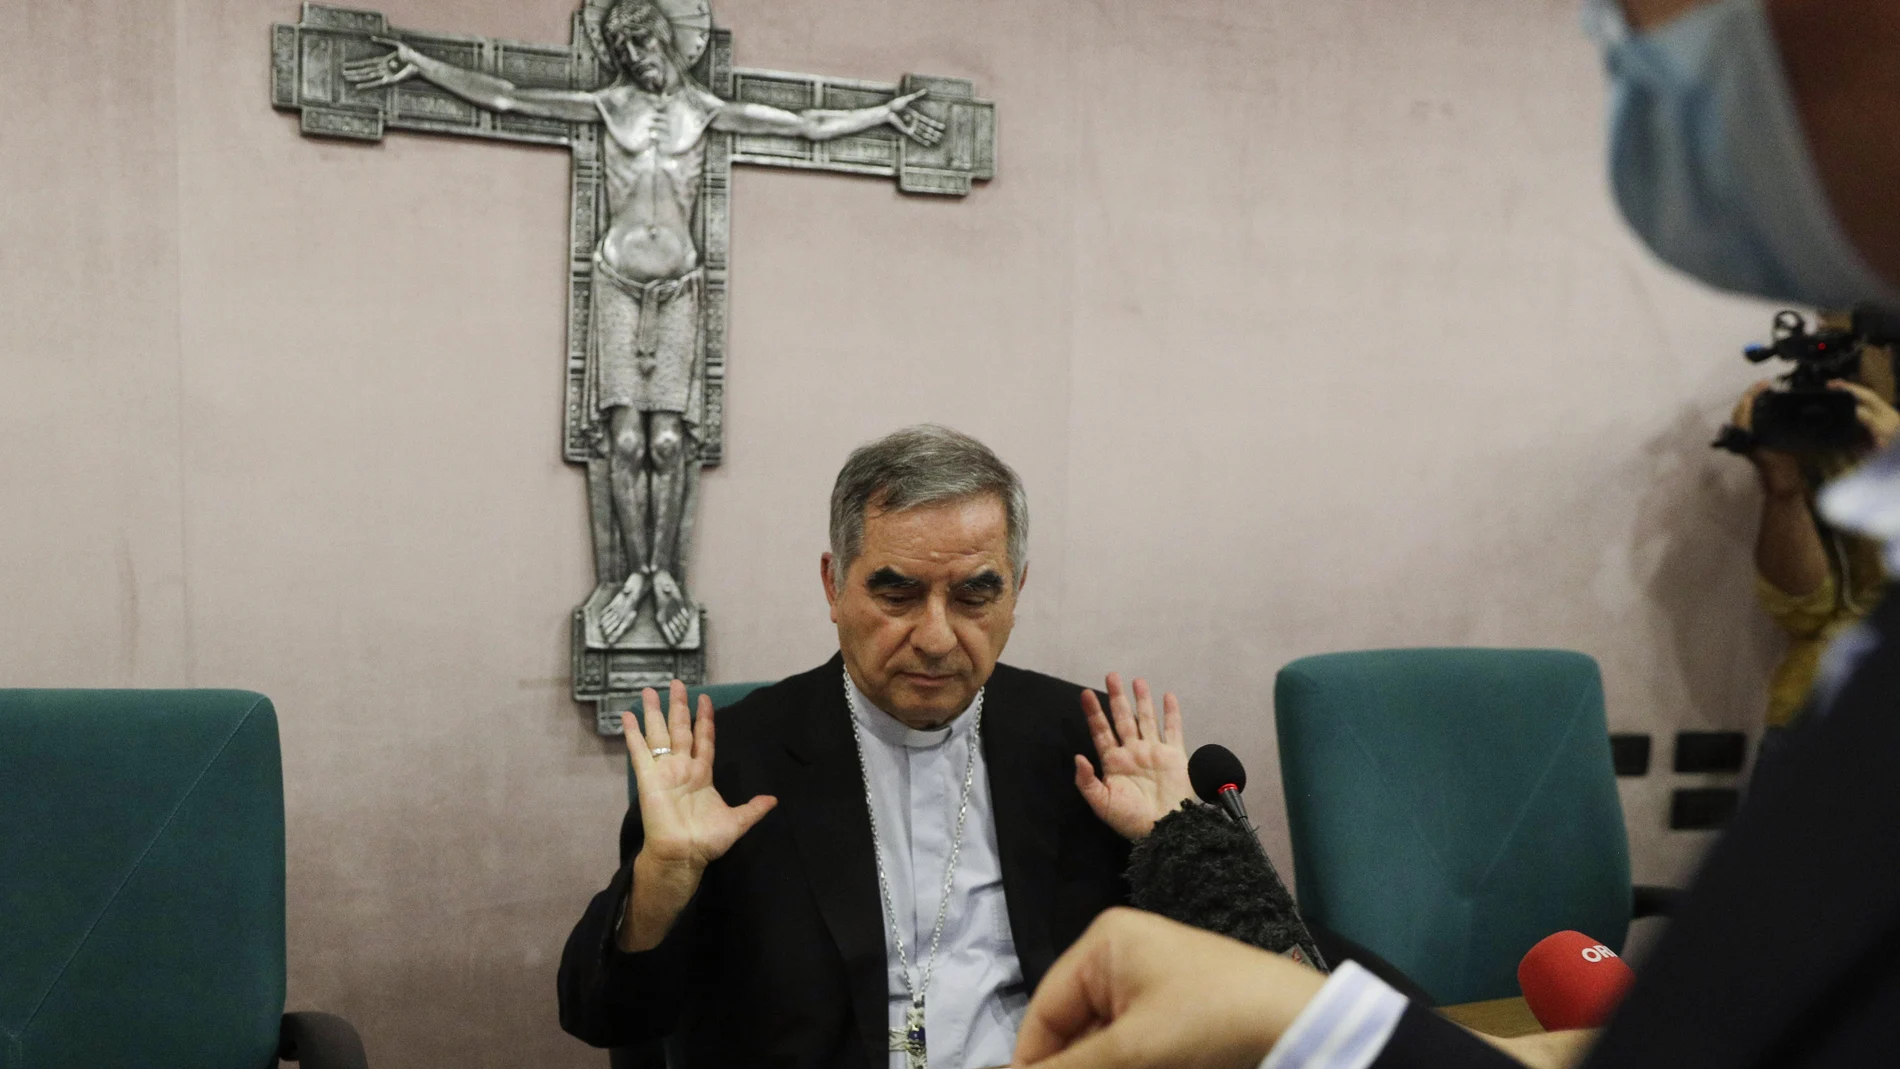 Cardinal Angelo Becciu talks to journalists during press conference in Rome.